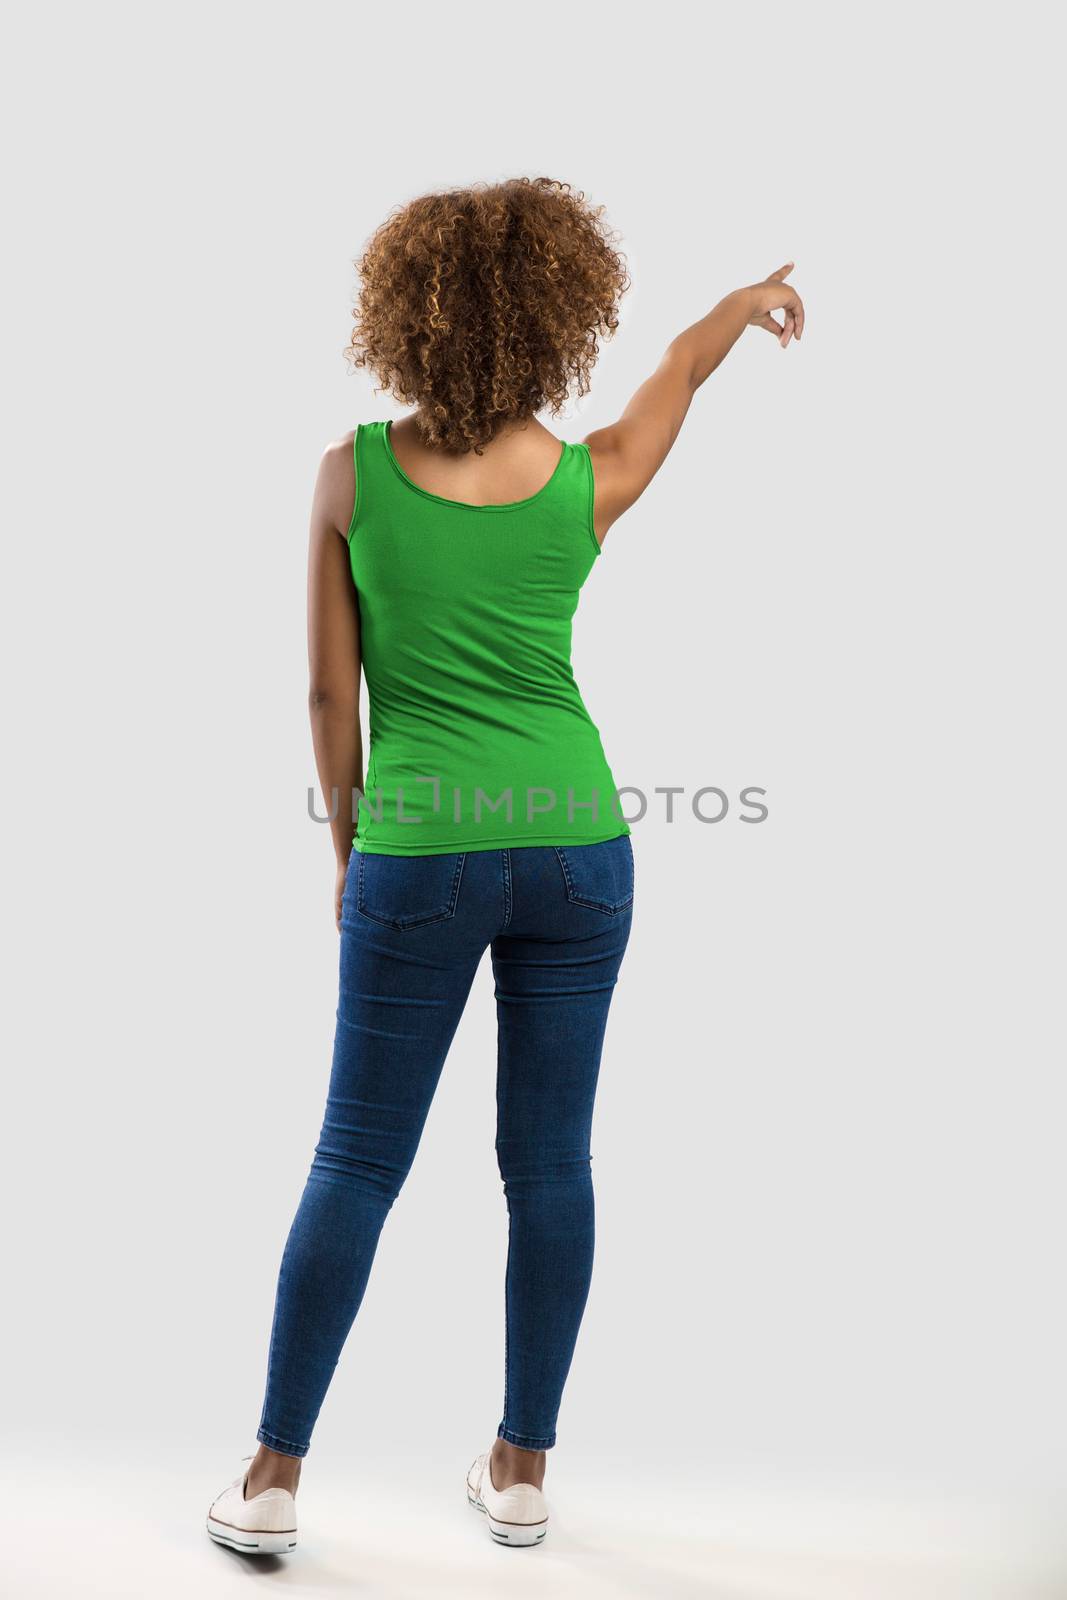 Beautiful African American woman pointing to somewhere